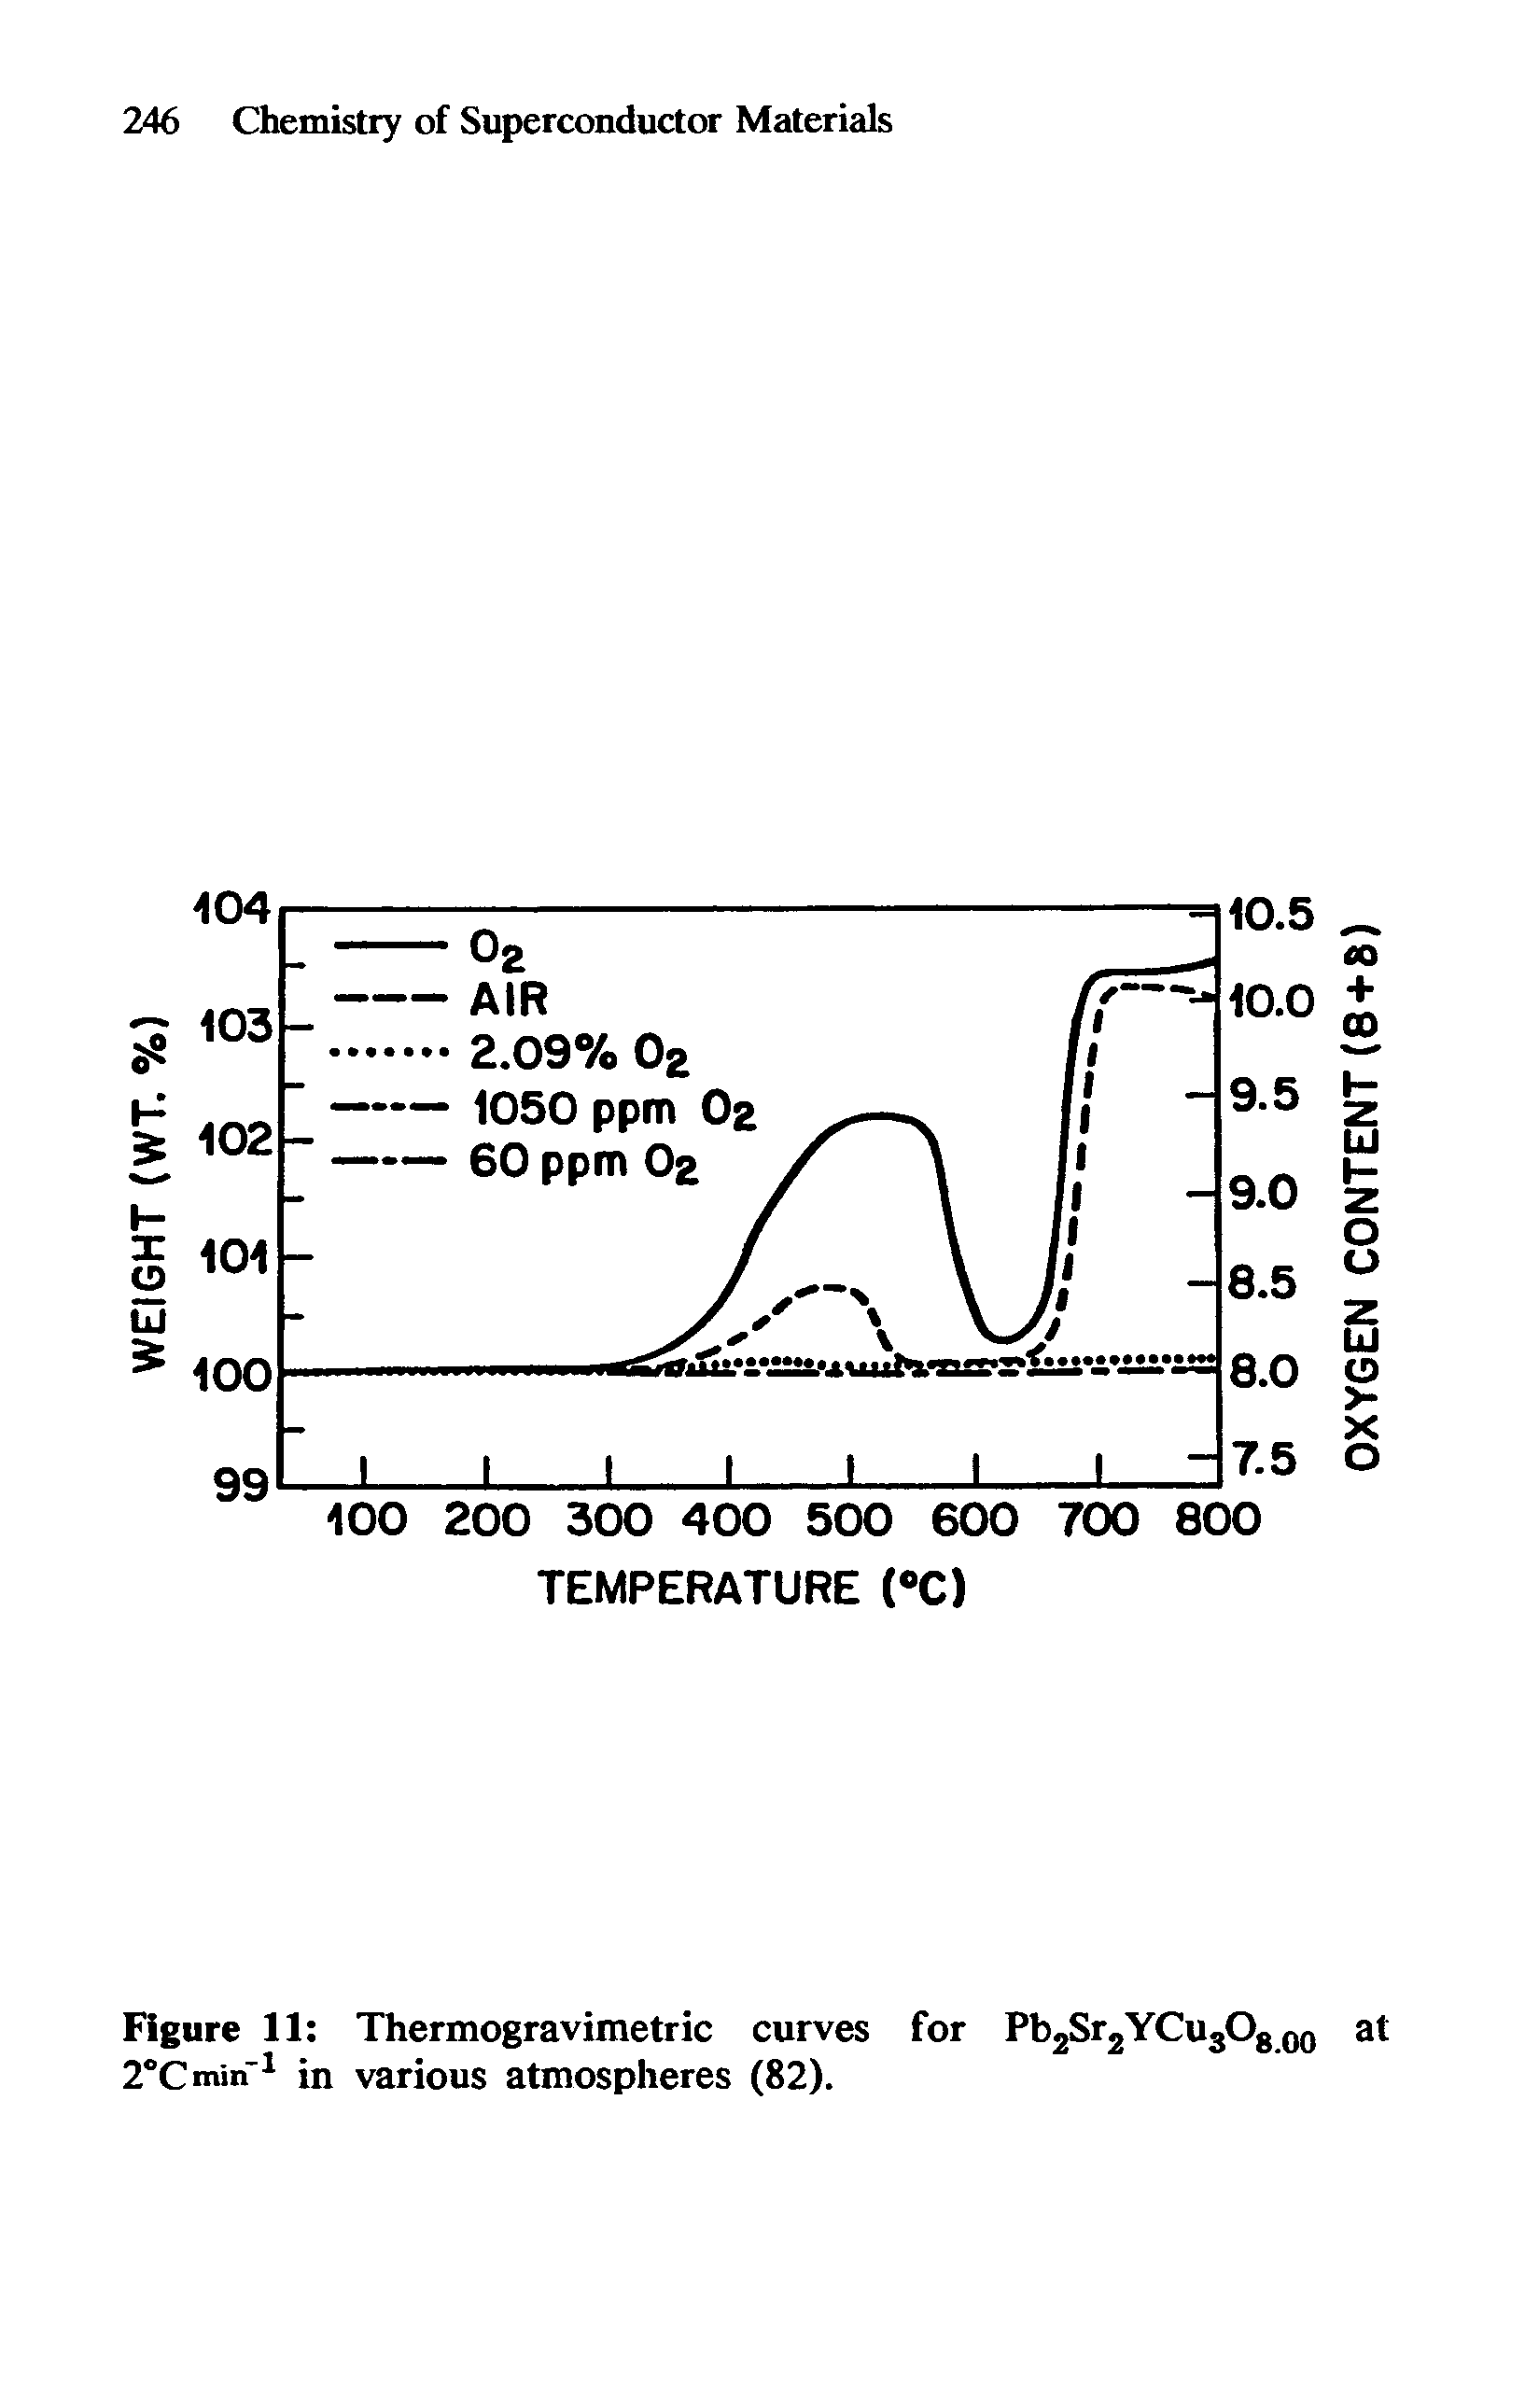 Figure 11 Thermogravimetric curves for Pb2Sr2YCu308 00 at 2°CminT1 in various atmospheres (82).